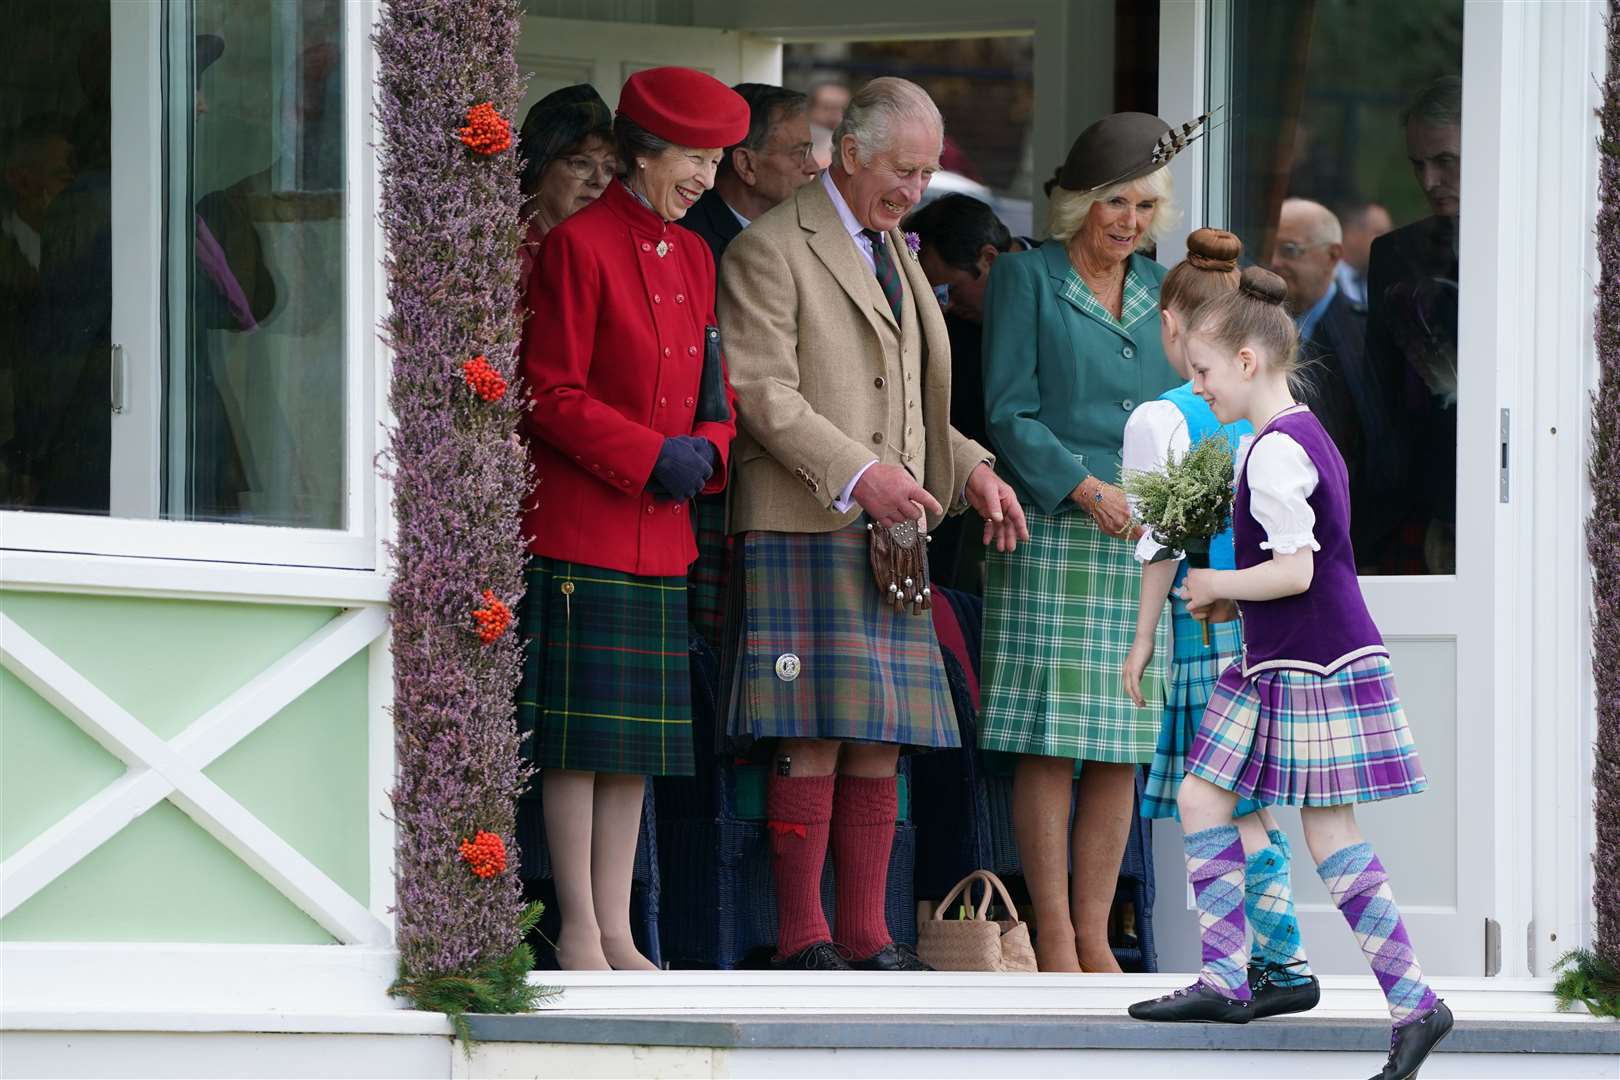 Young Highland dancers present flowers to the royal party (Andrew Milligan/PA)